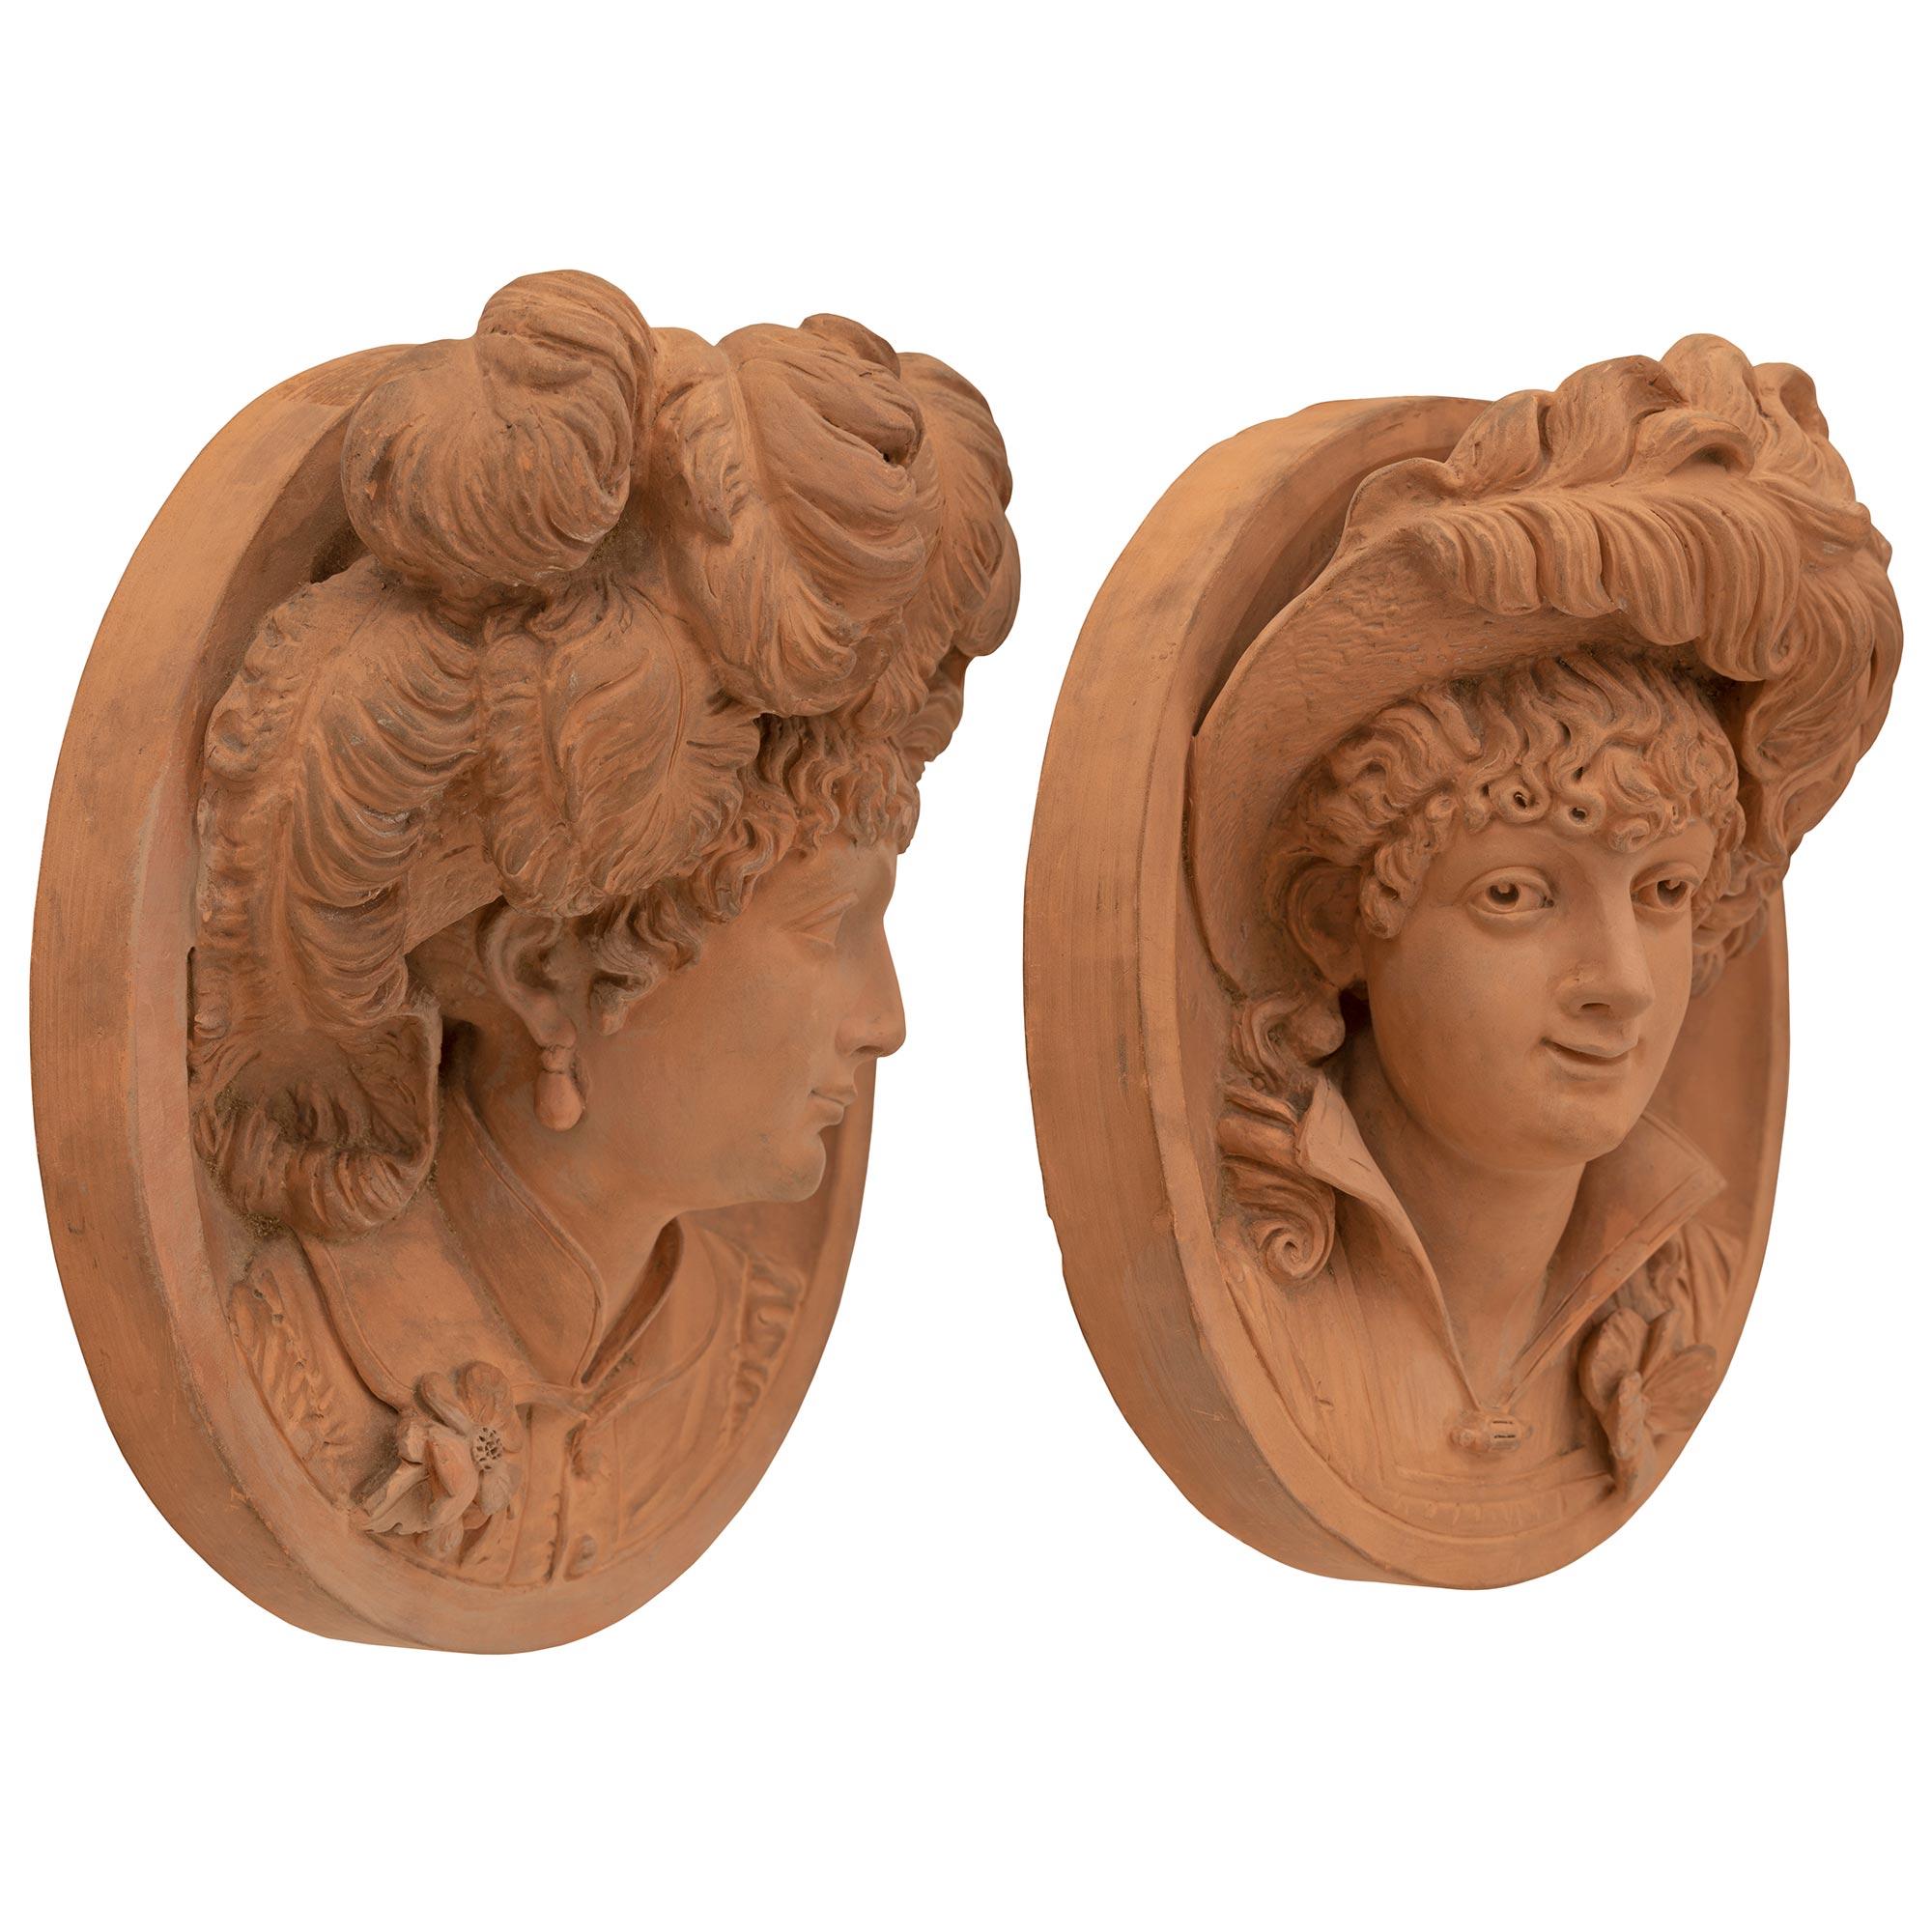 A beautiful and wonderfully executed true pair of French 19th century Louis XVI st. Belle Époque period Terra Cotta decorative wall plaques signed N. Laval 1880. Each oval plaque displays exceptional attention to detail with the left plaque